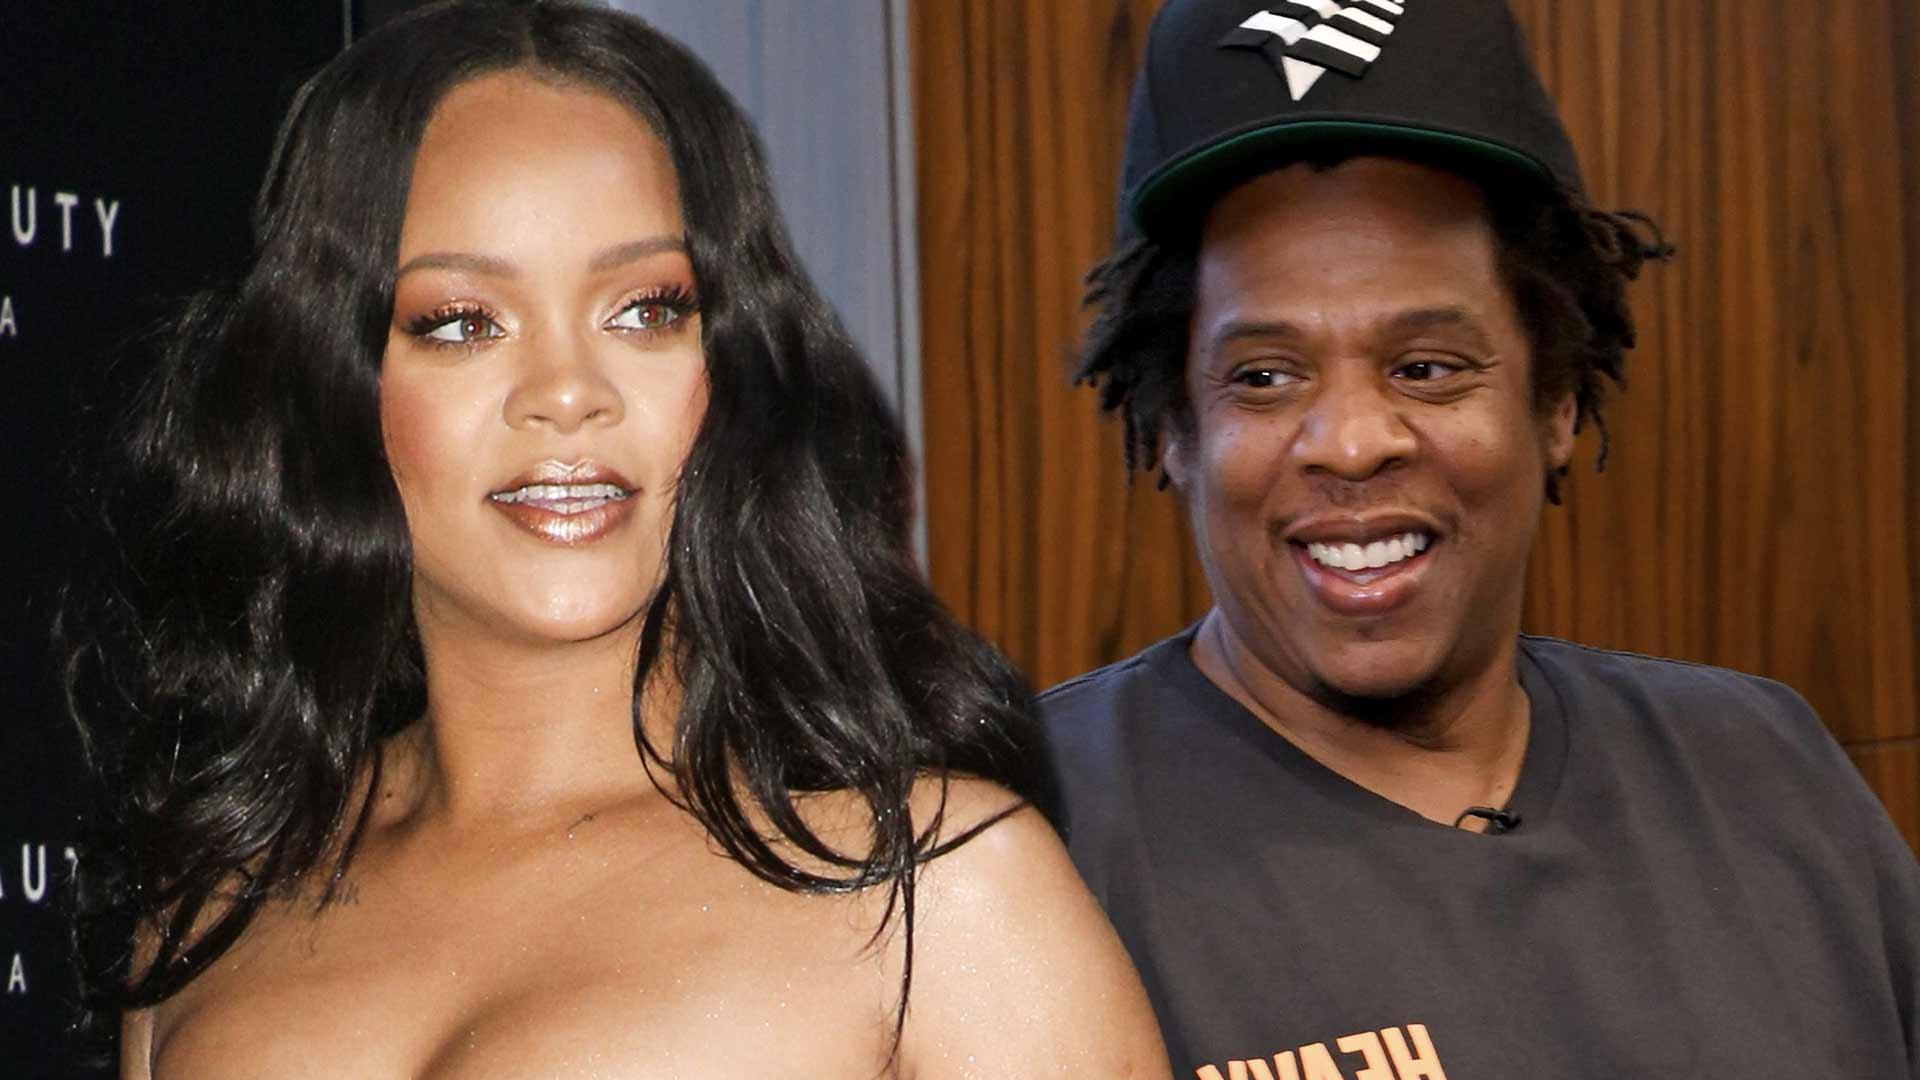 Rihanna’s Super Bowl ‘Sellout’ Comment Was Made Days Before Jay-Z Inked Deal, She Had No Idea